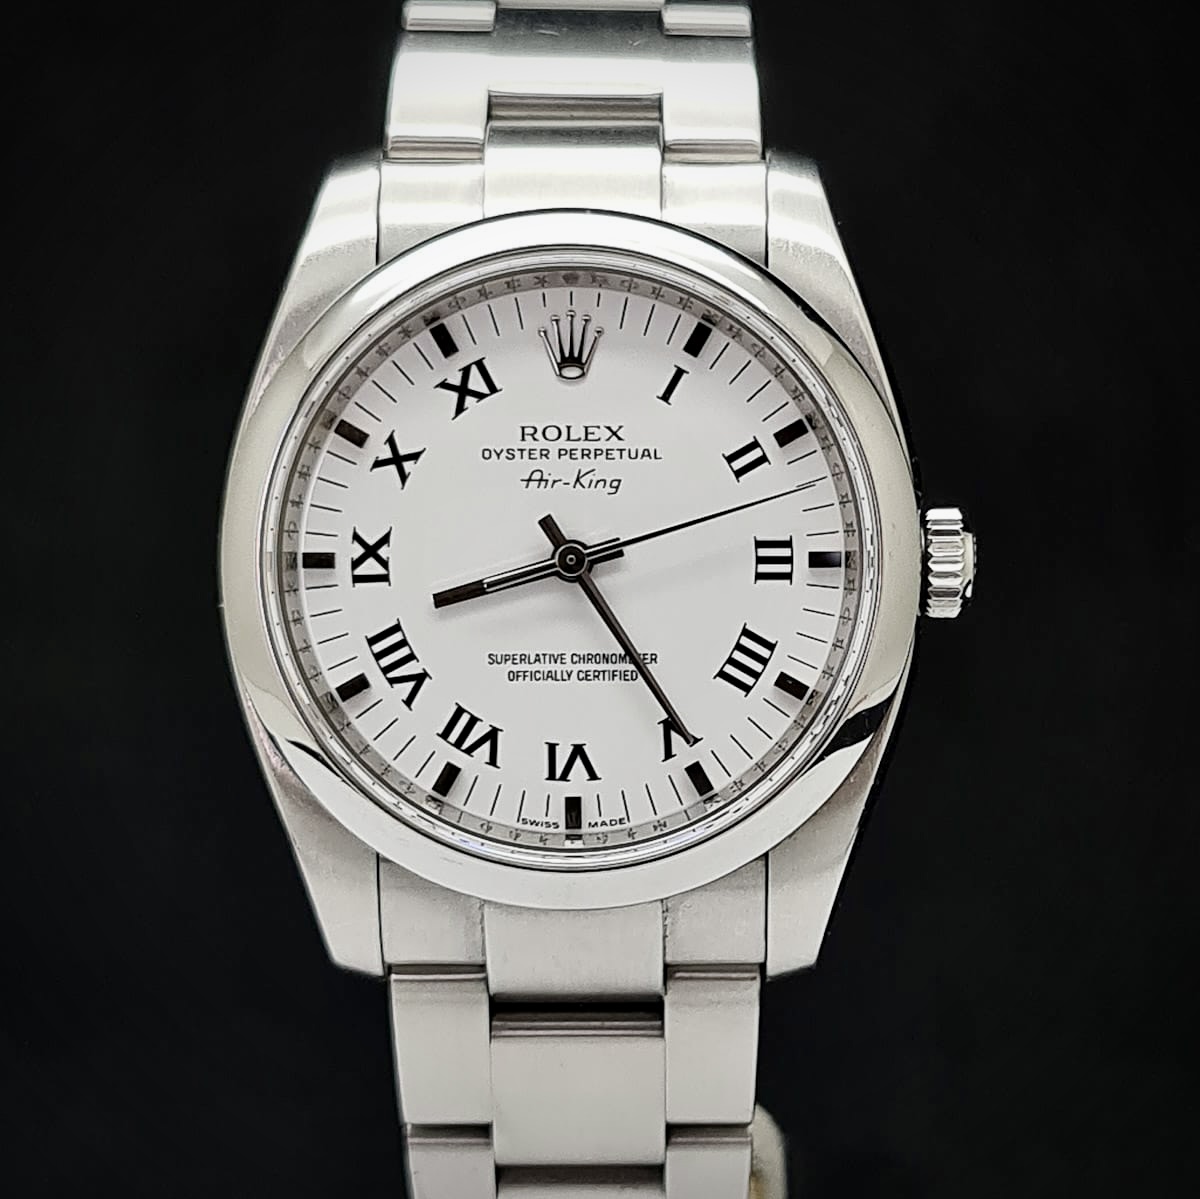 ROLEX OYSTER PERPETUAL AIR KING